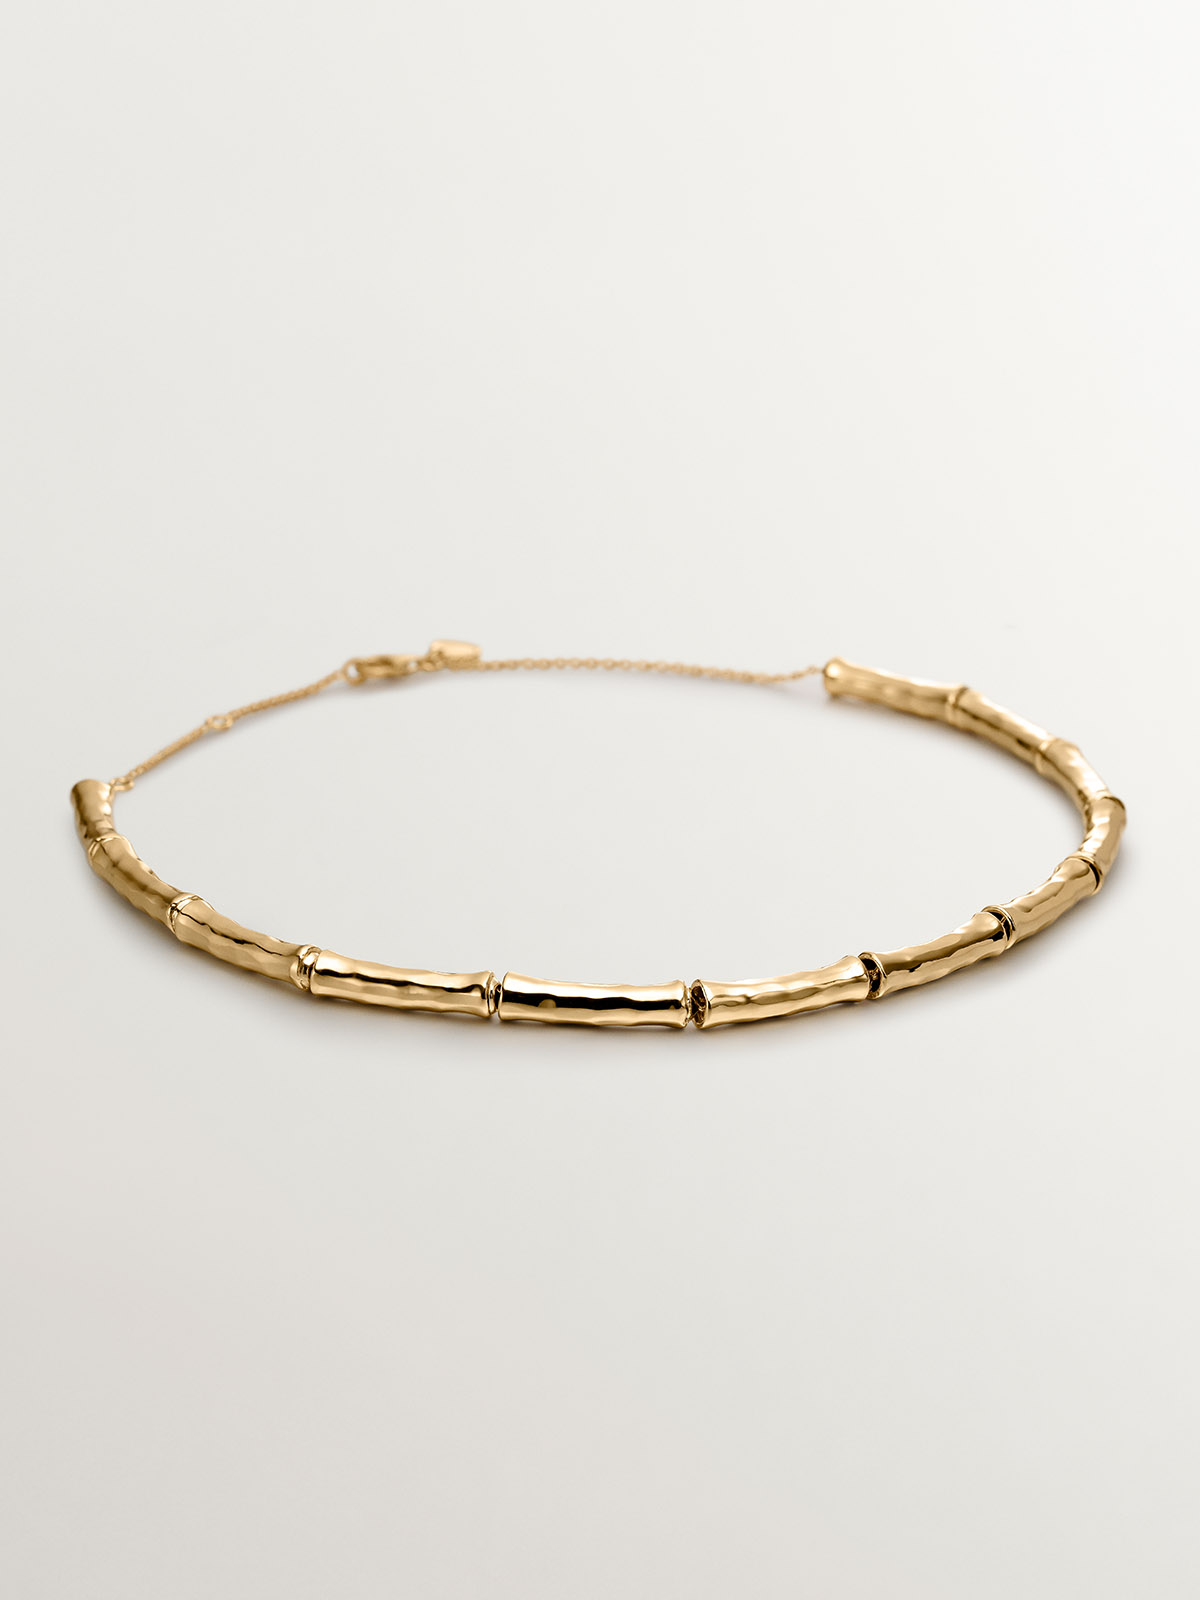 925 Silver necklace bathed in 18K yellow gold with bamboo texture